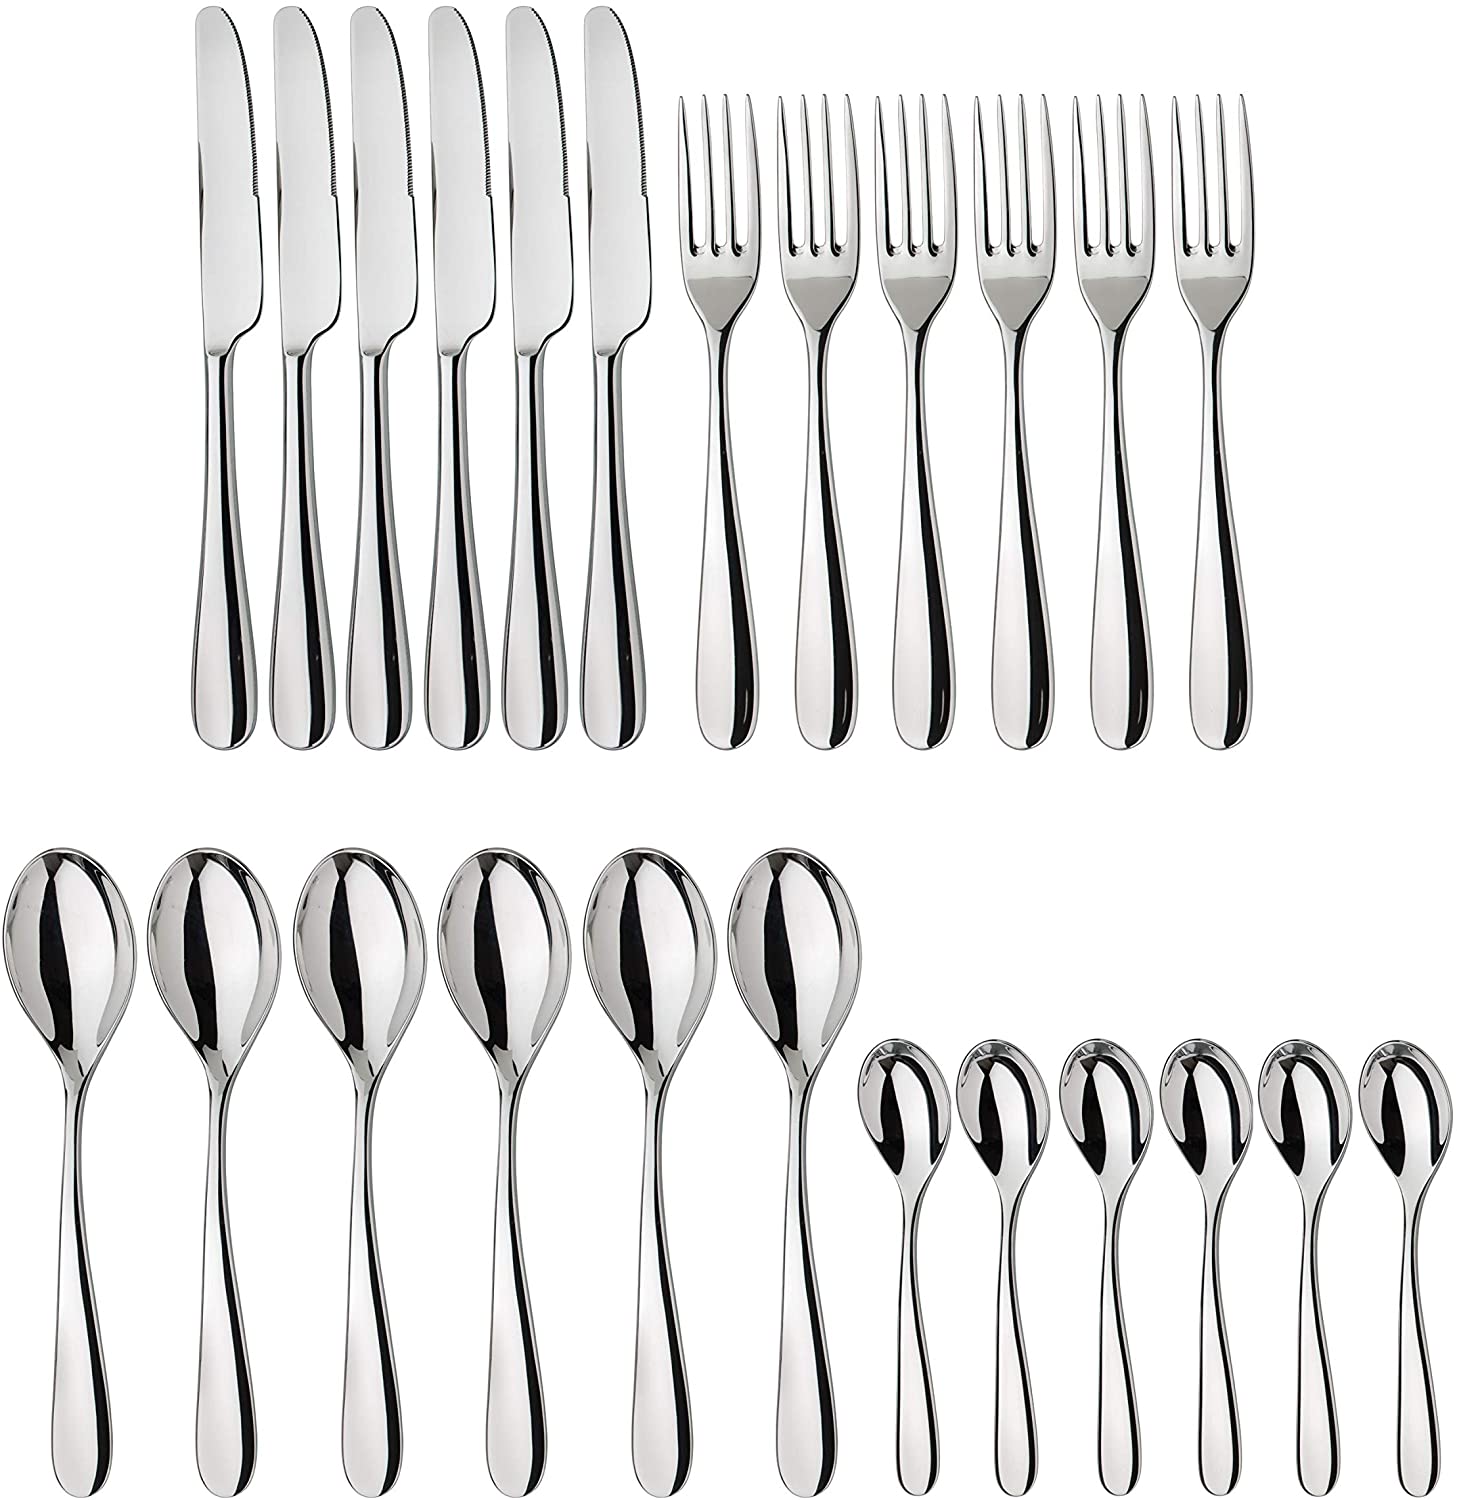 Alessi - Cutlery set - Nuovo Milano - stainless steel - high gloss - 24 pieces